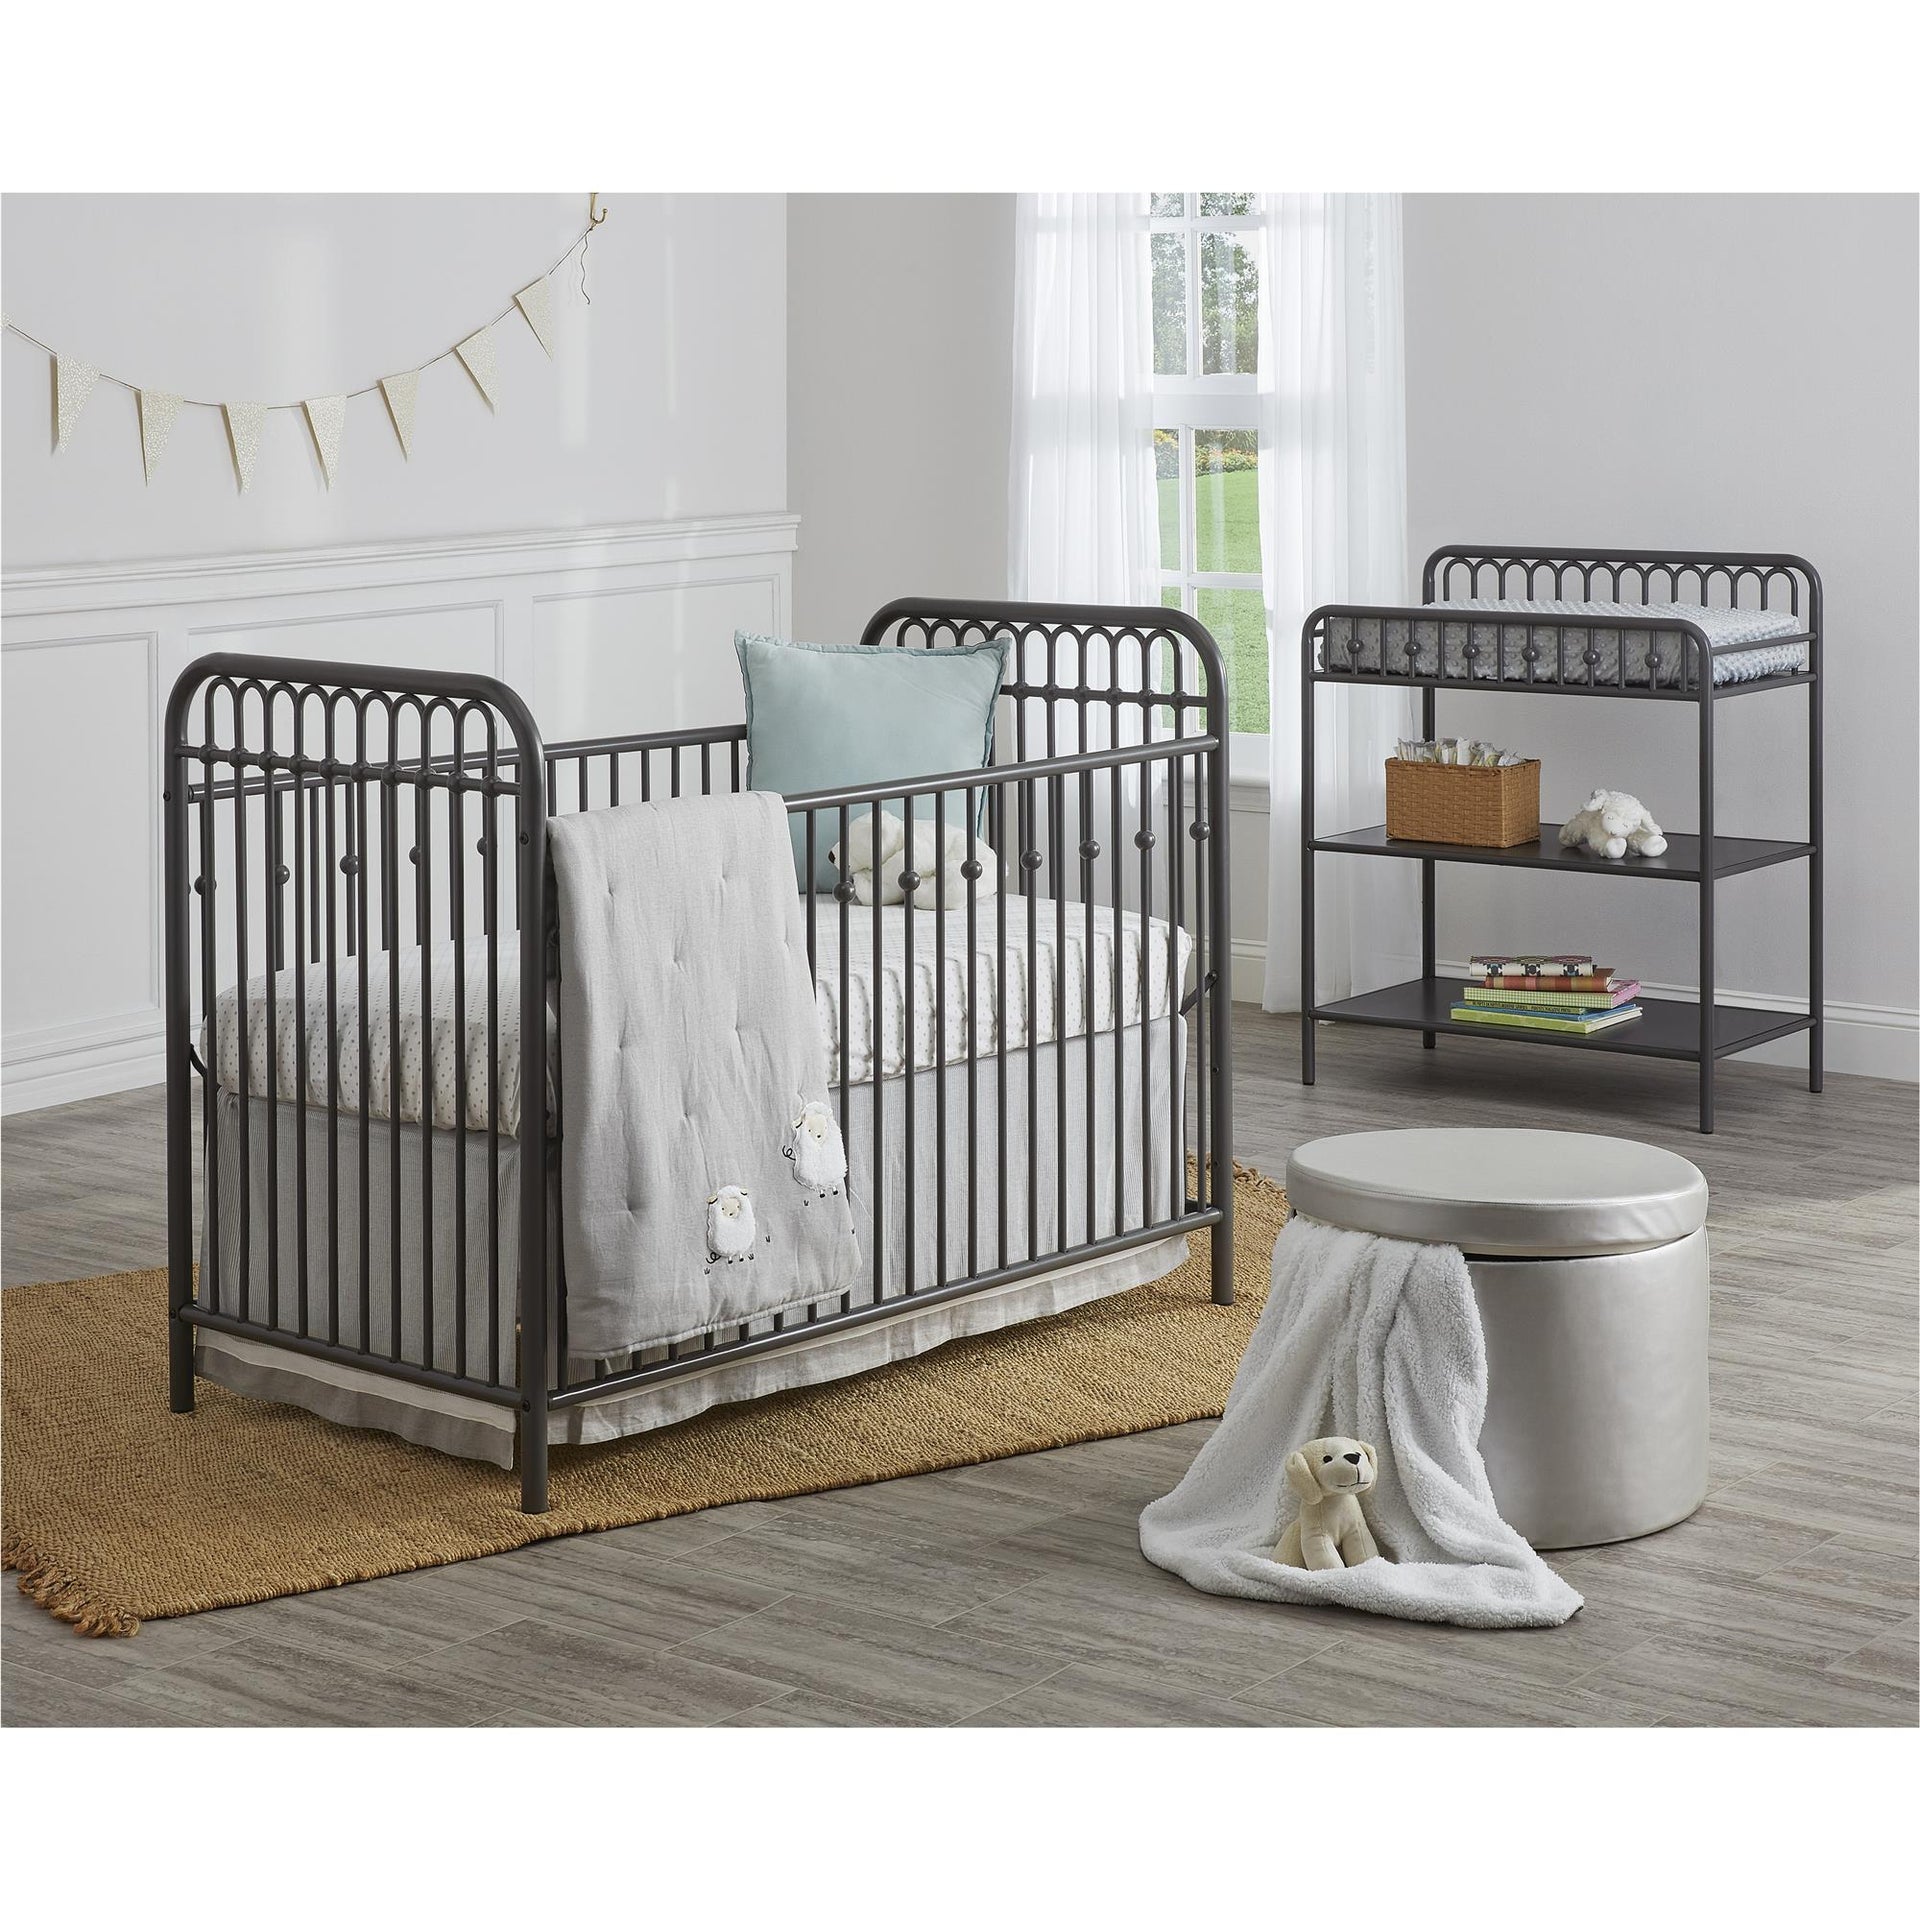 Little Seeds Monarch Hill Ivy Metal Baby Crib - Gray